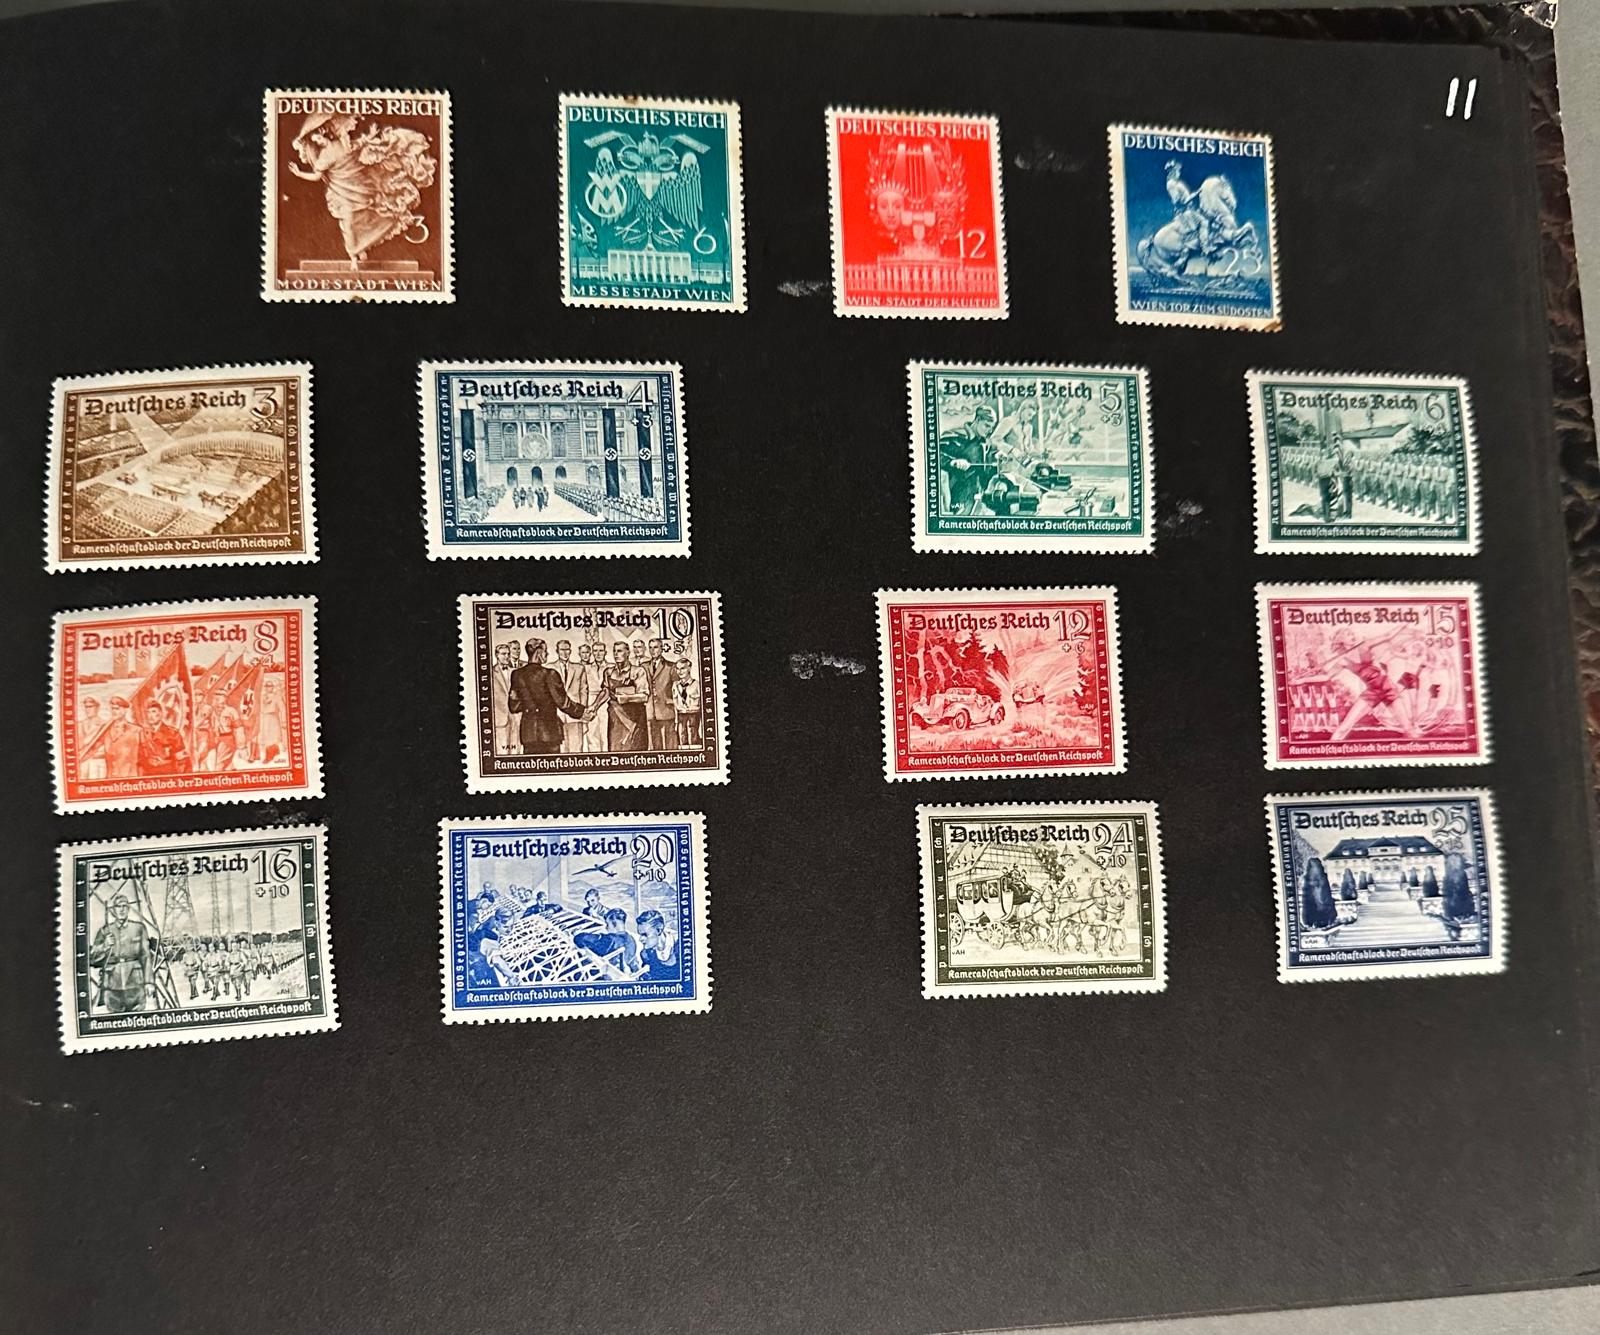 A WWII era German stamp album with a range of various stamps, denominations and issues. - Image 7 of 11